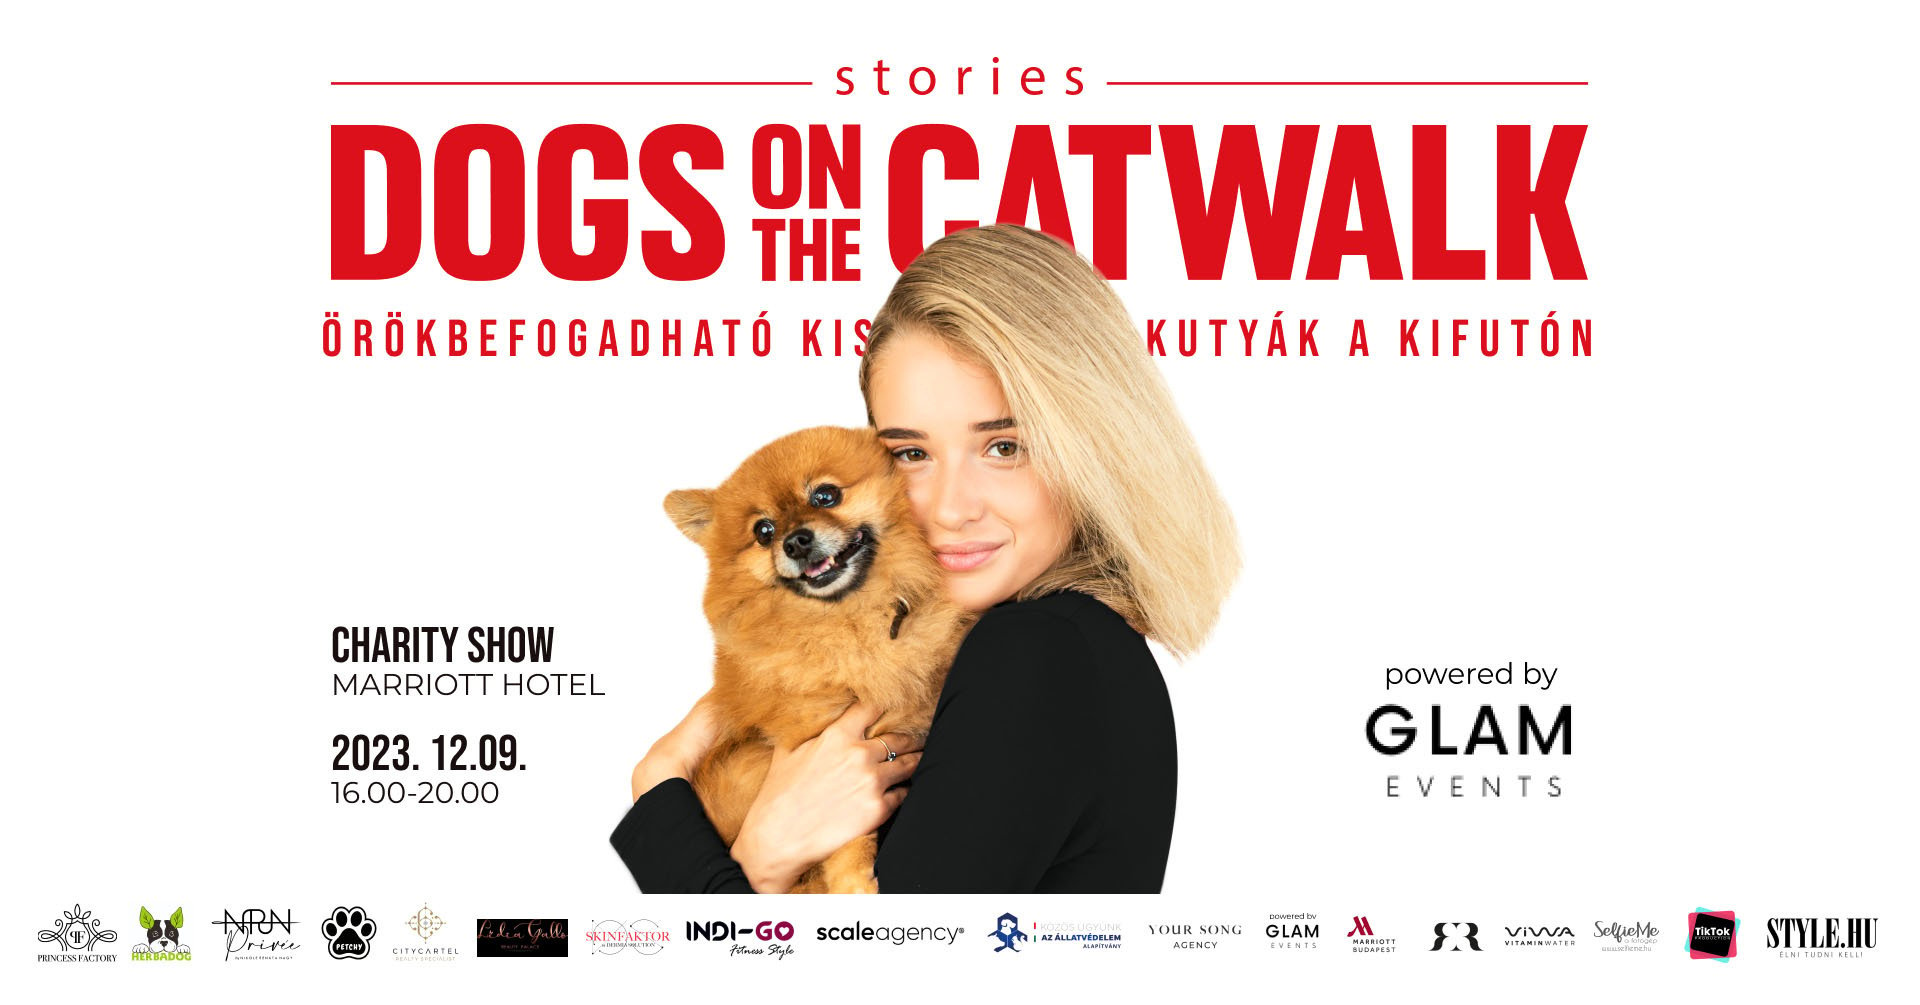  Stories I Dogs on the catwalk powered by GLAM events 